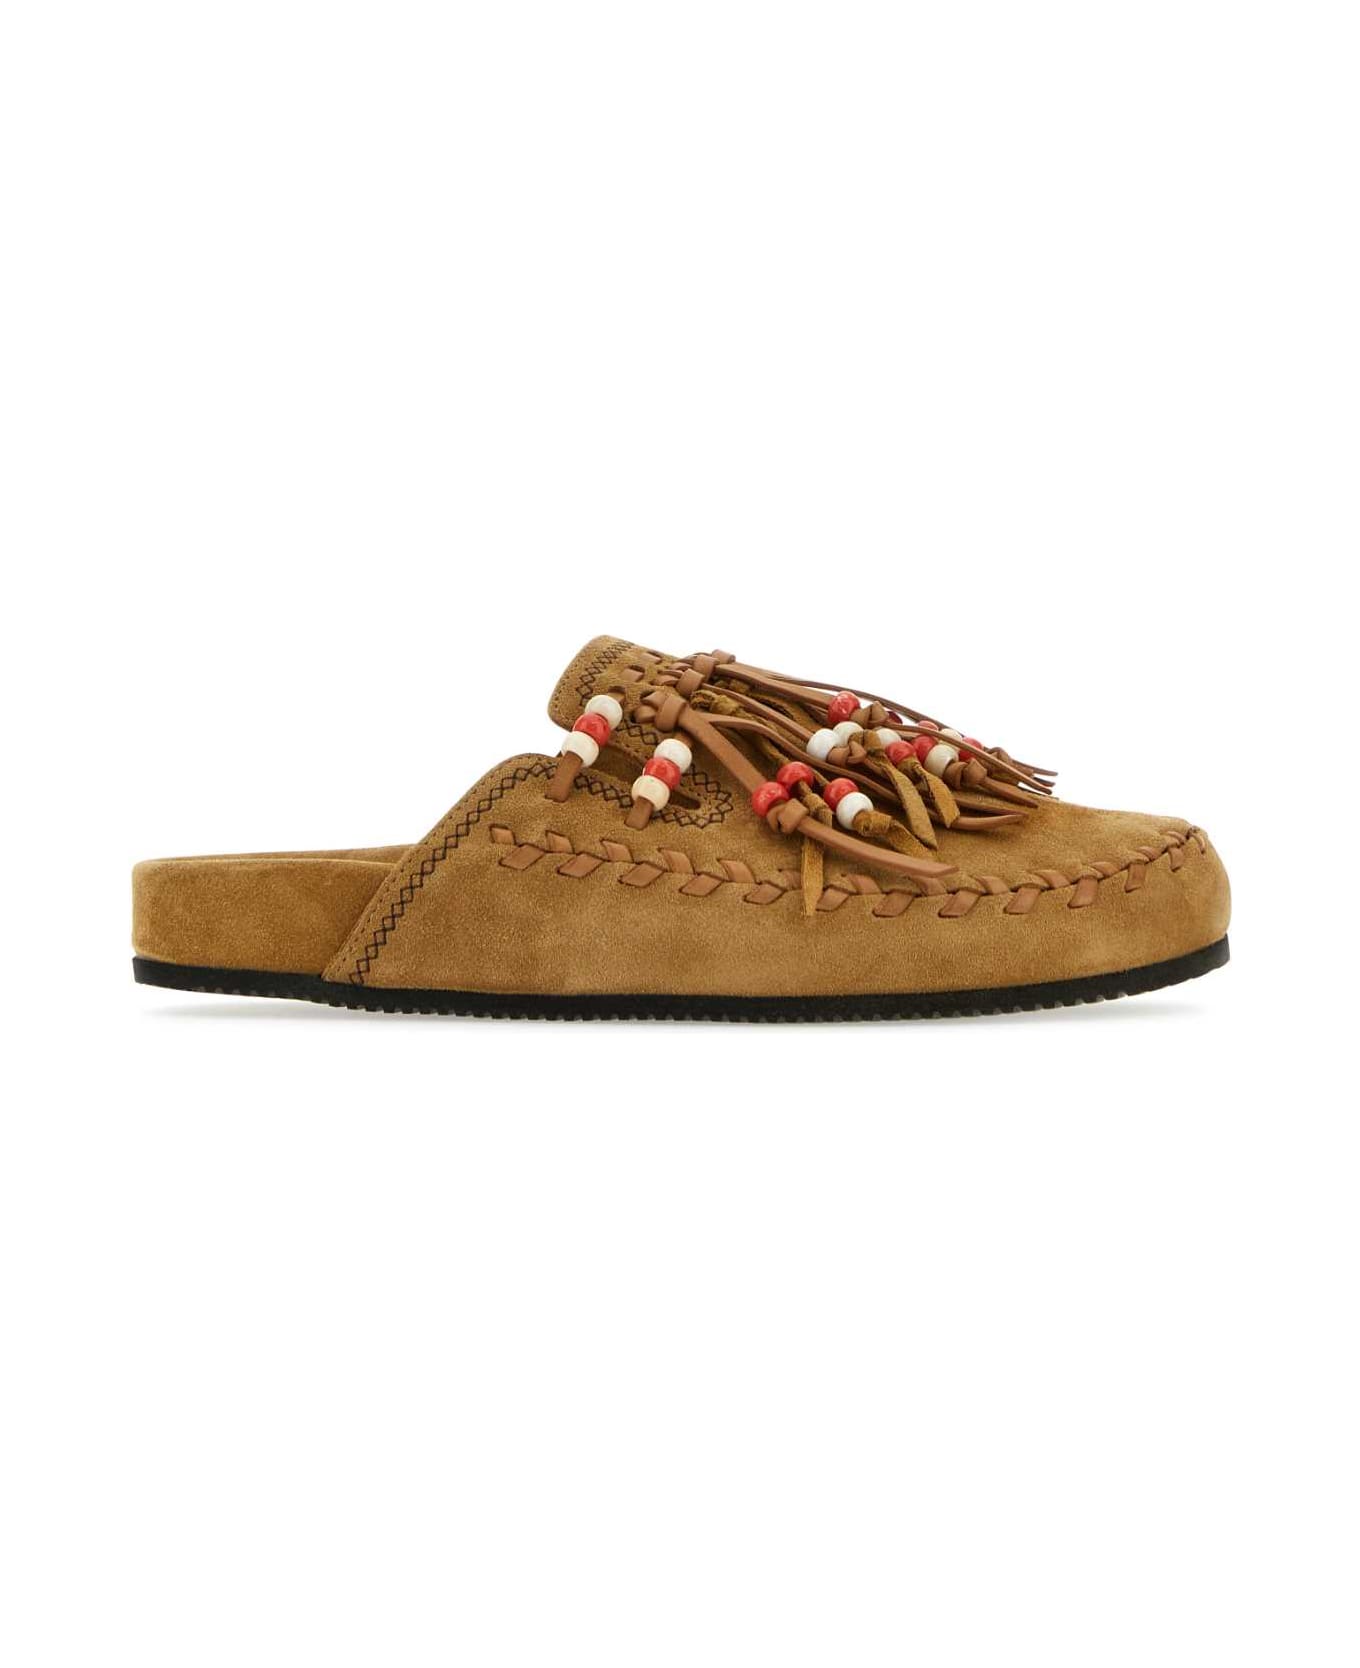 Alanui Biscuit Suede Leather Salvation Mountain Slippers - Multicolor